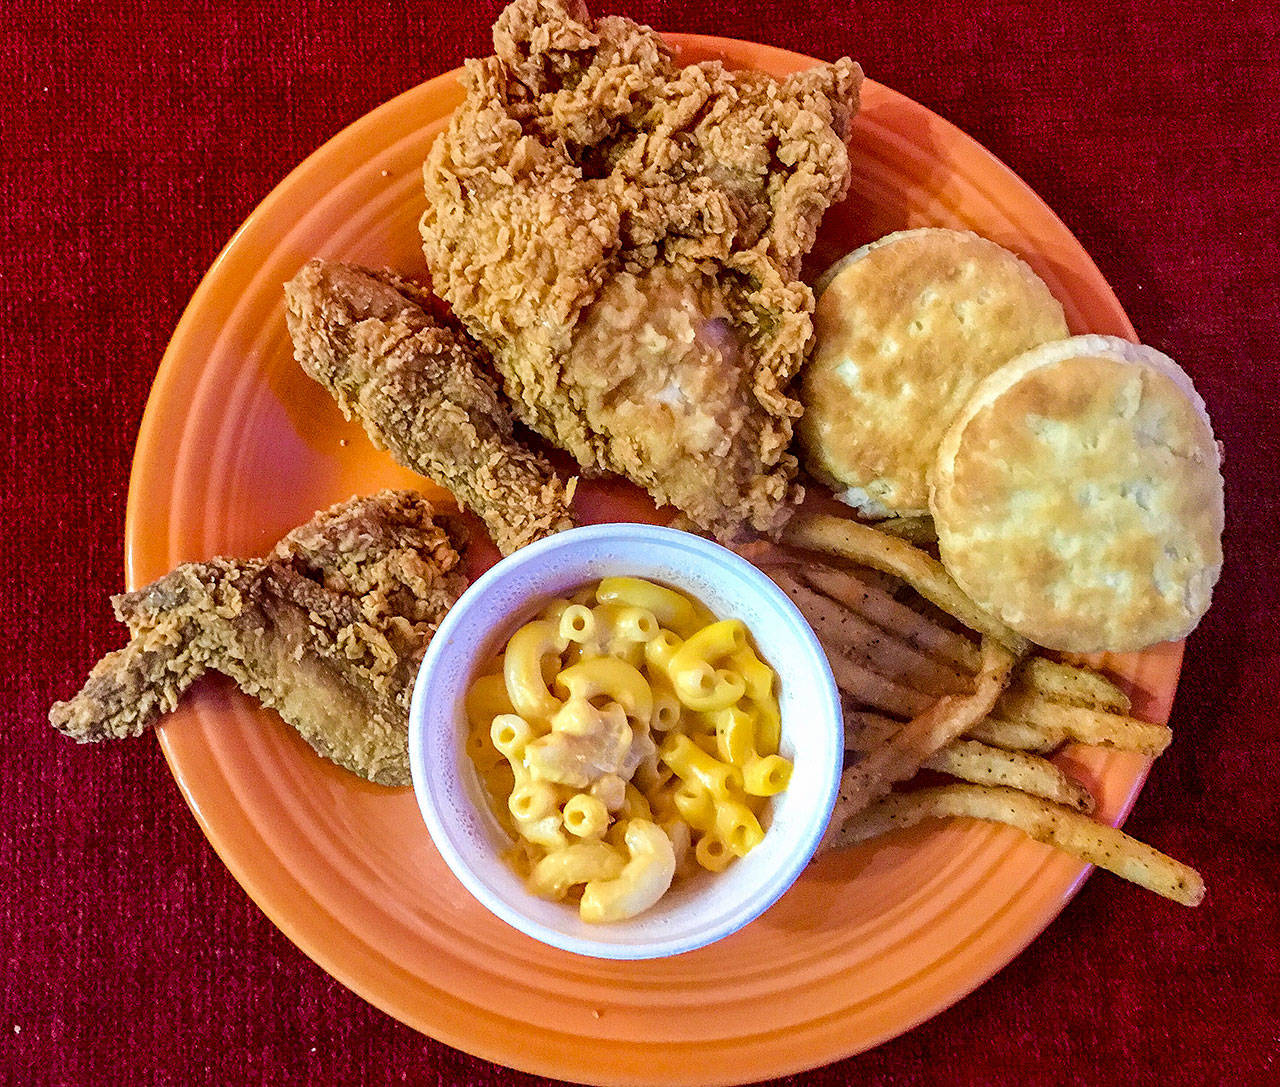 A carryout from Popeyes Louisiana Kitchen displayed on a plate at home has New Orleans style chicken, buttermilk biscuits, Cajun fries and macaroni and cheese. (Andrea Brown/The Herald)